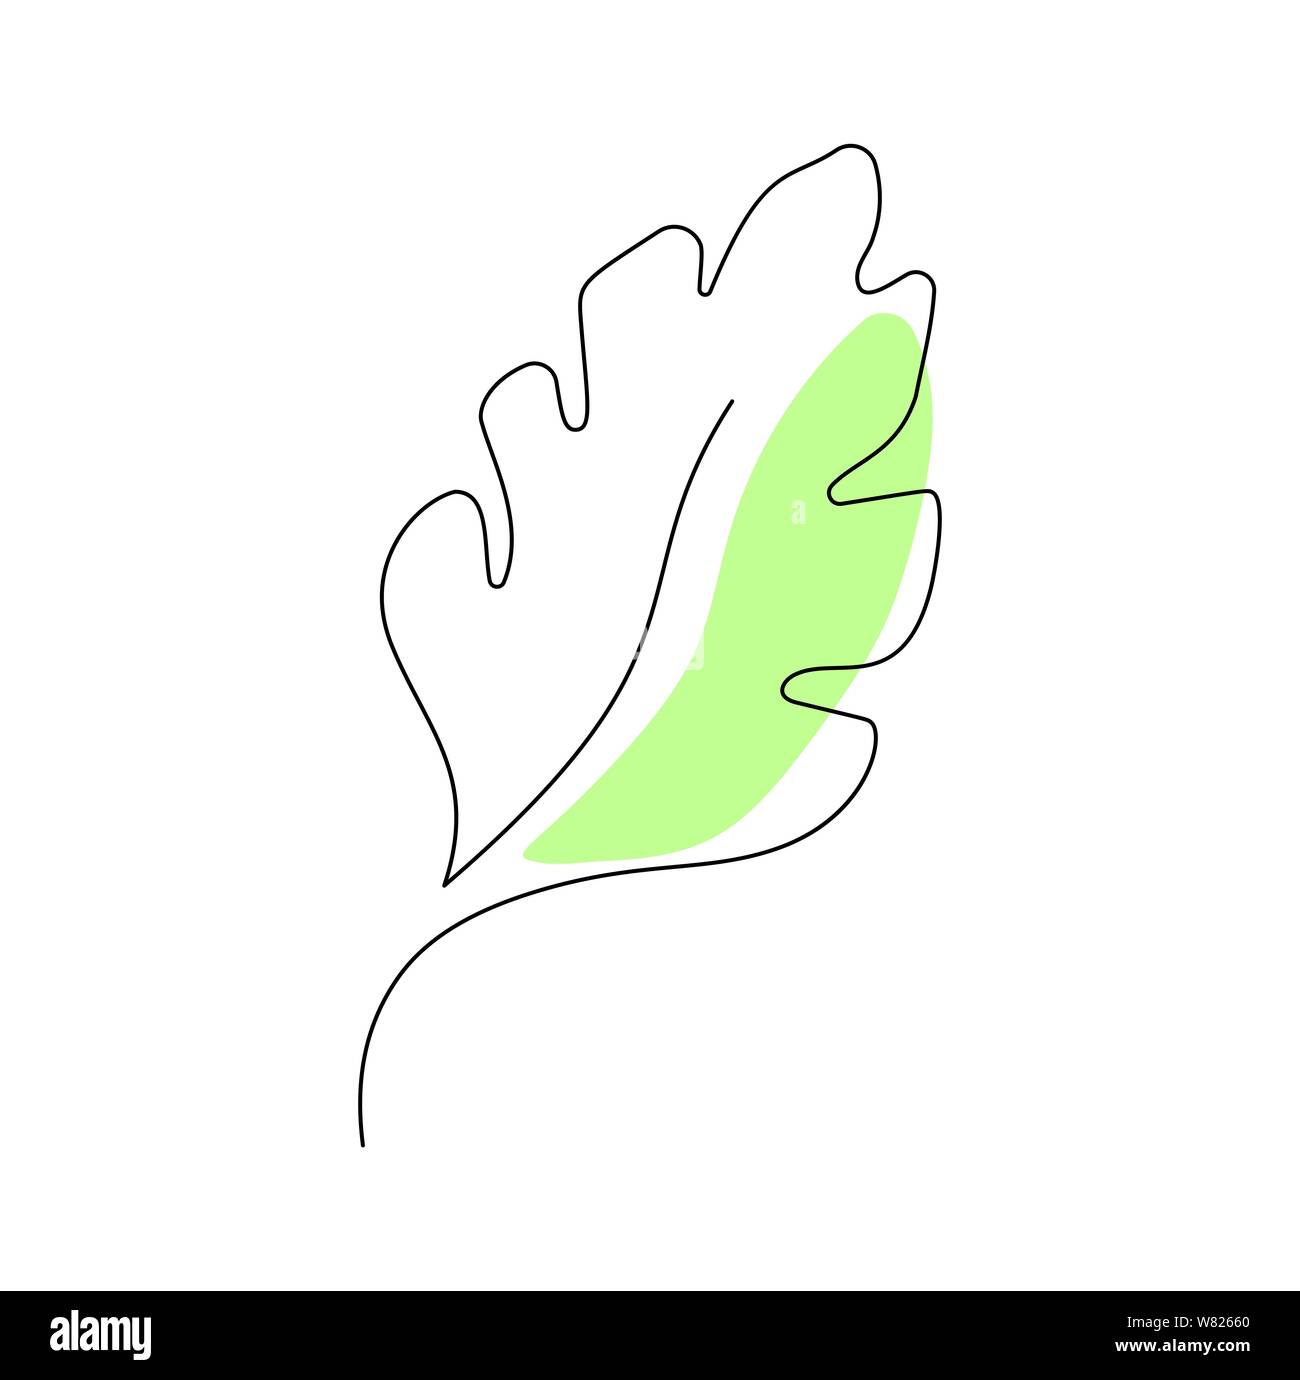 Continuous one line drawing of monstera leaf. Line art contour minimalism art for logo icon, web design. Modern decor Stock Vector